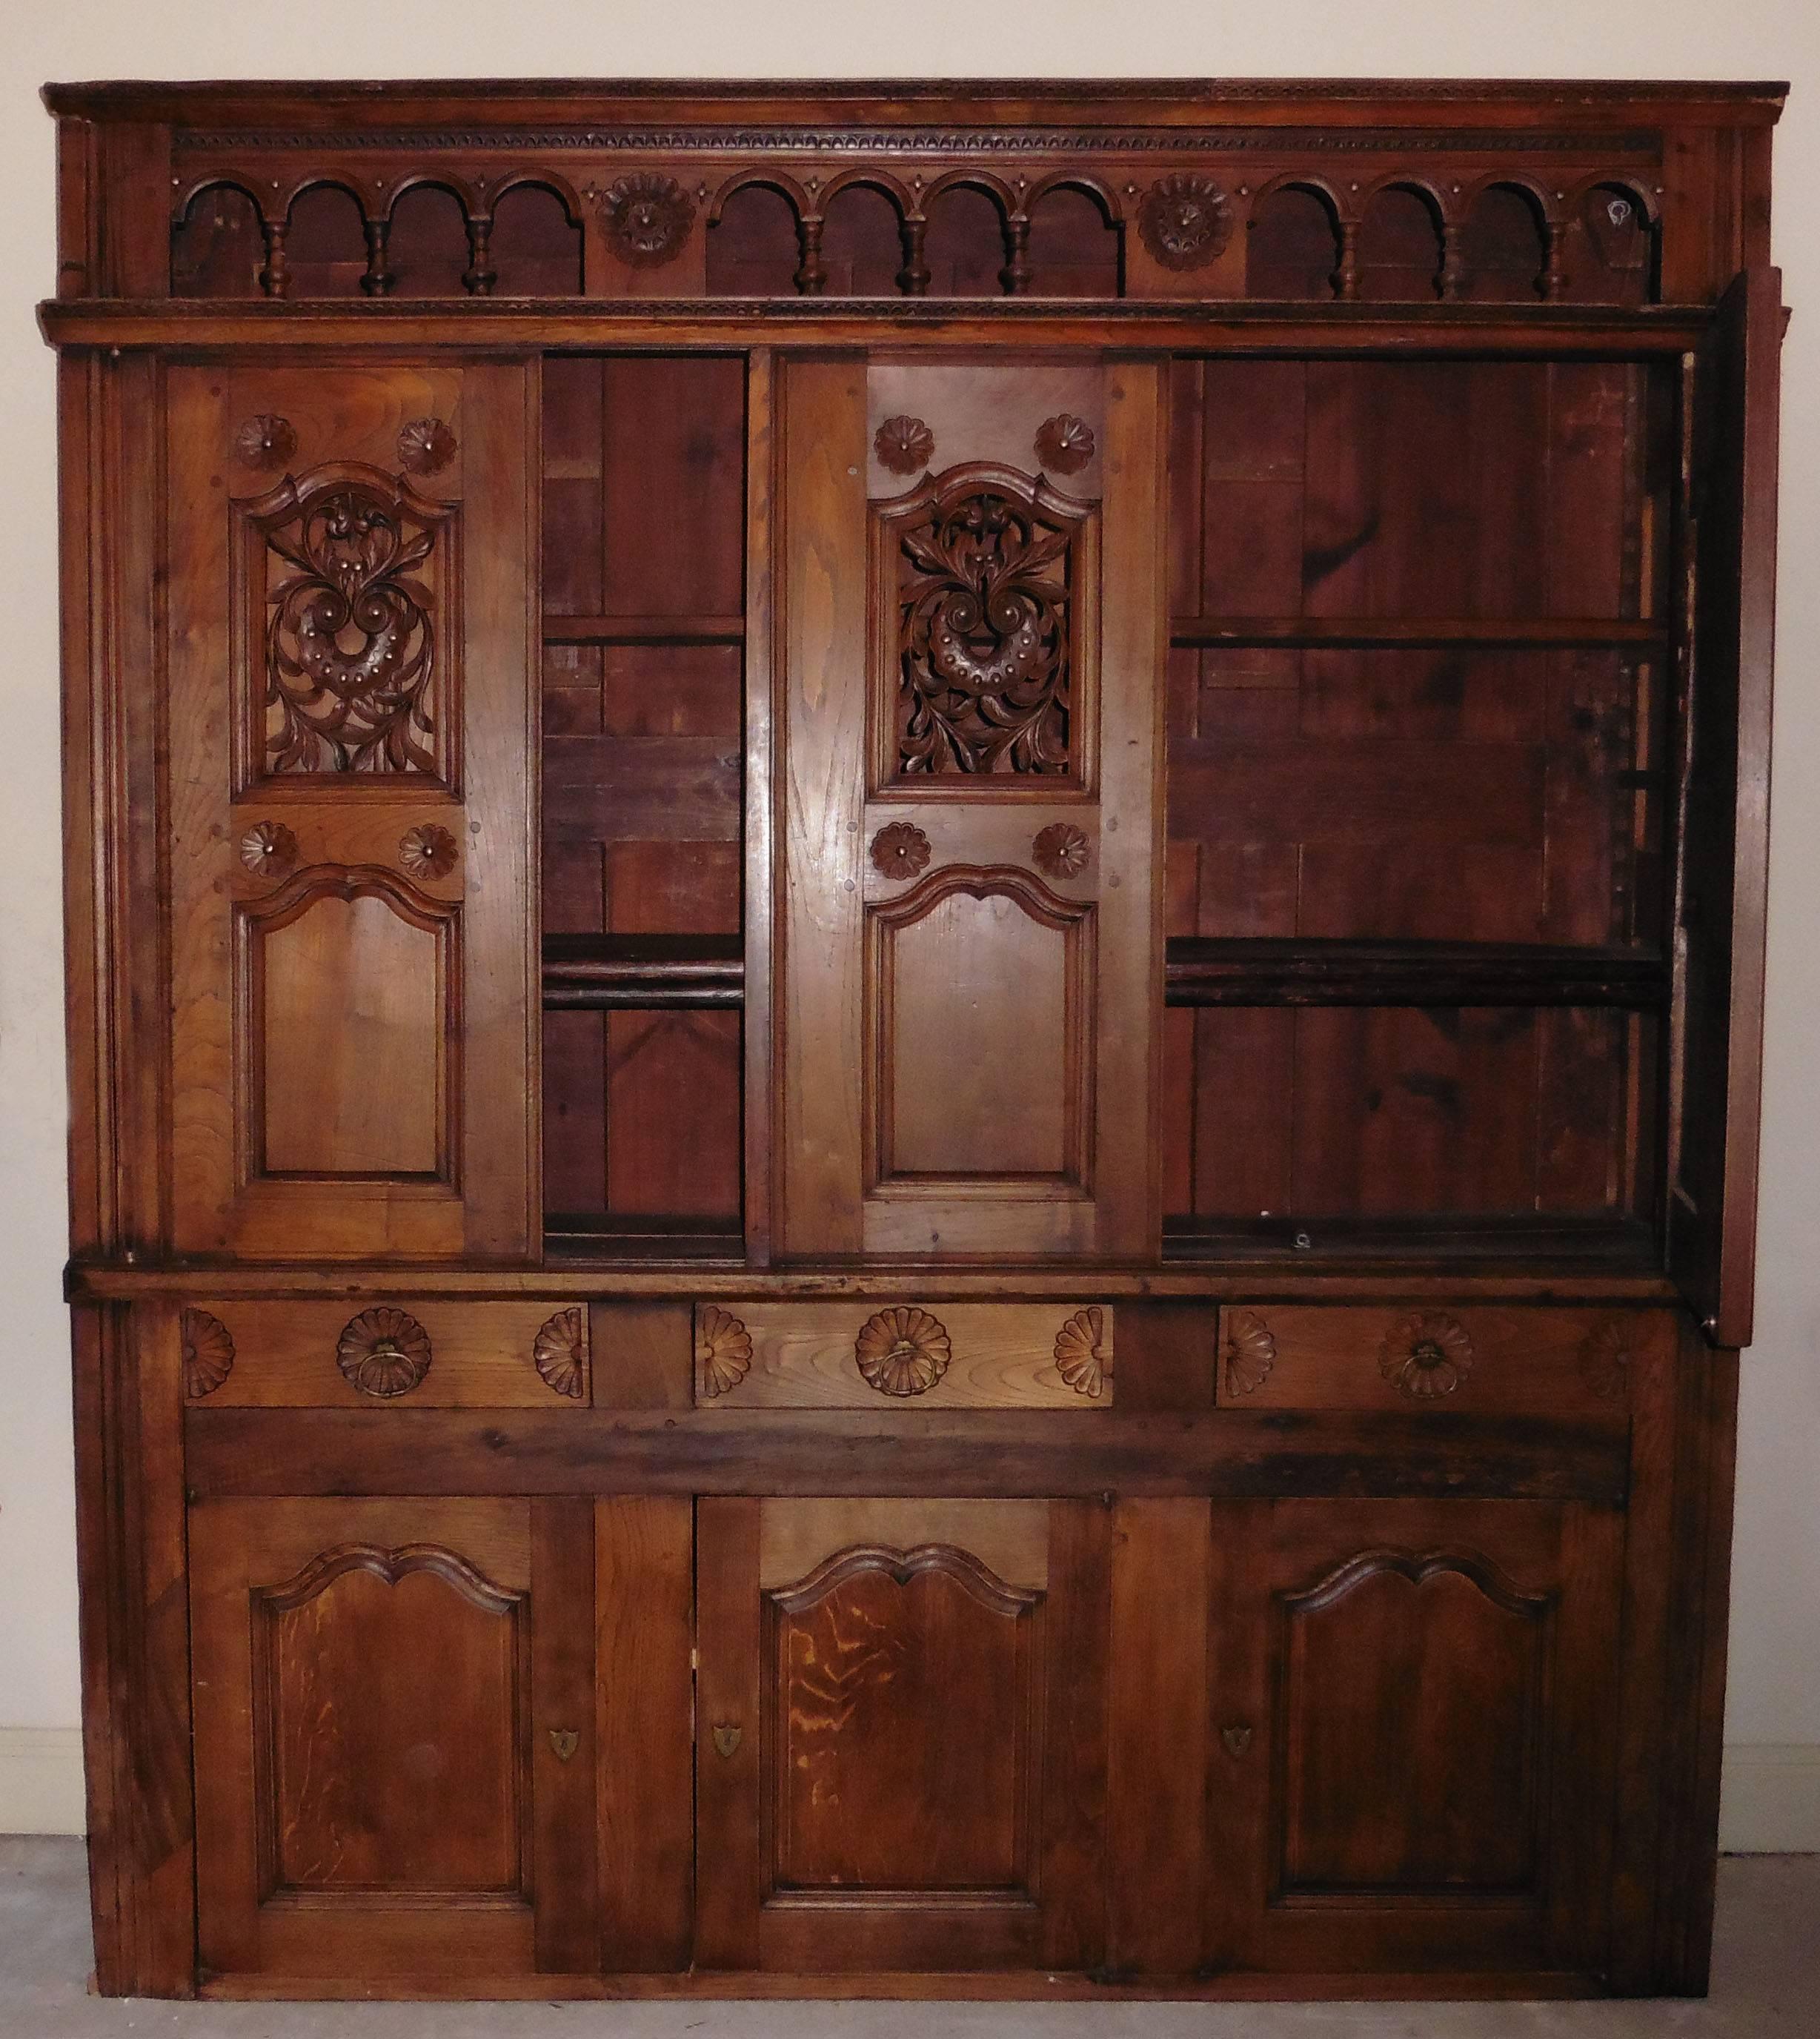 Spectacular 19th century, French carved buffet cabinet from Brittany. The buffet is entirely carved from chestnut tree.
Sliding doors, three drawers and three doors.